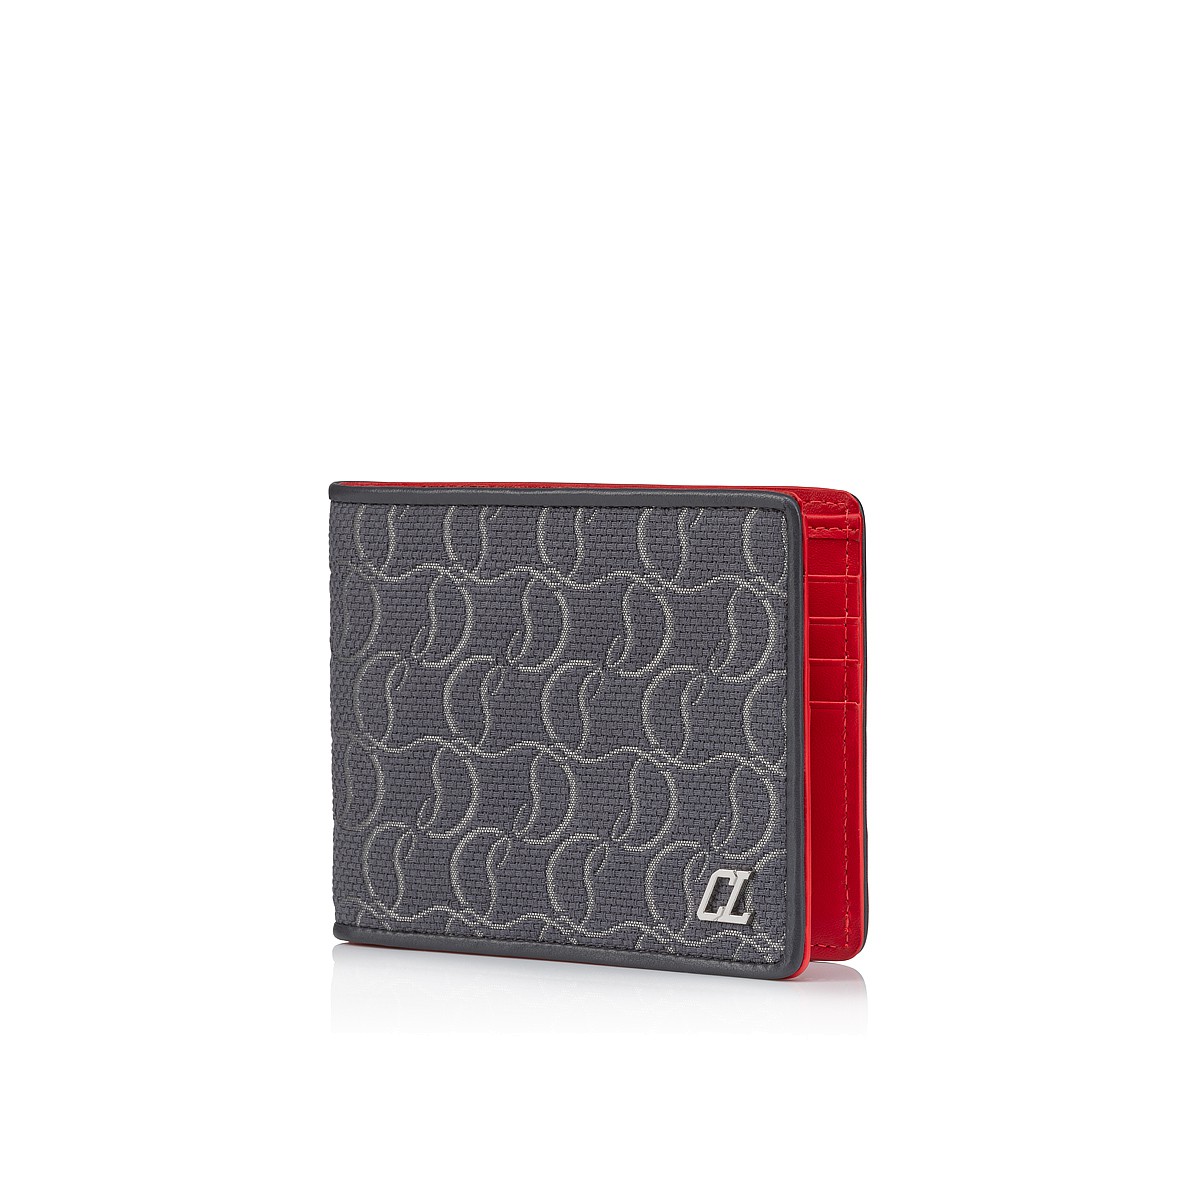 Small Leather Goods - Coolcard - Christian Louboutin